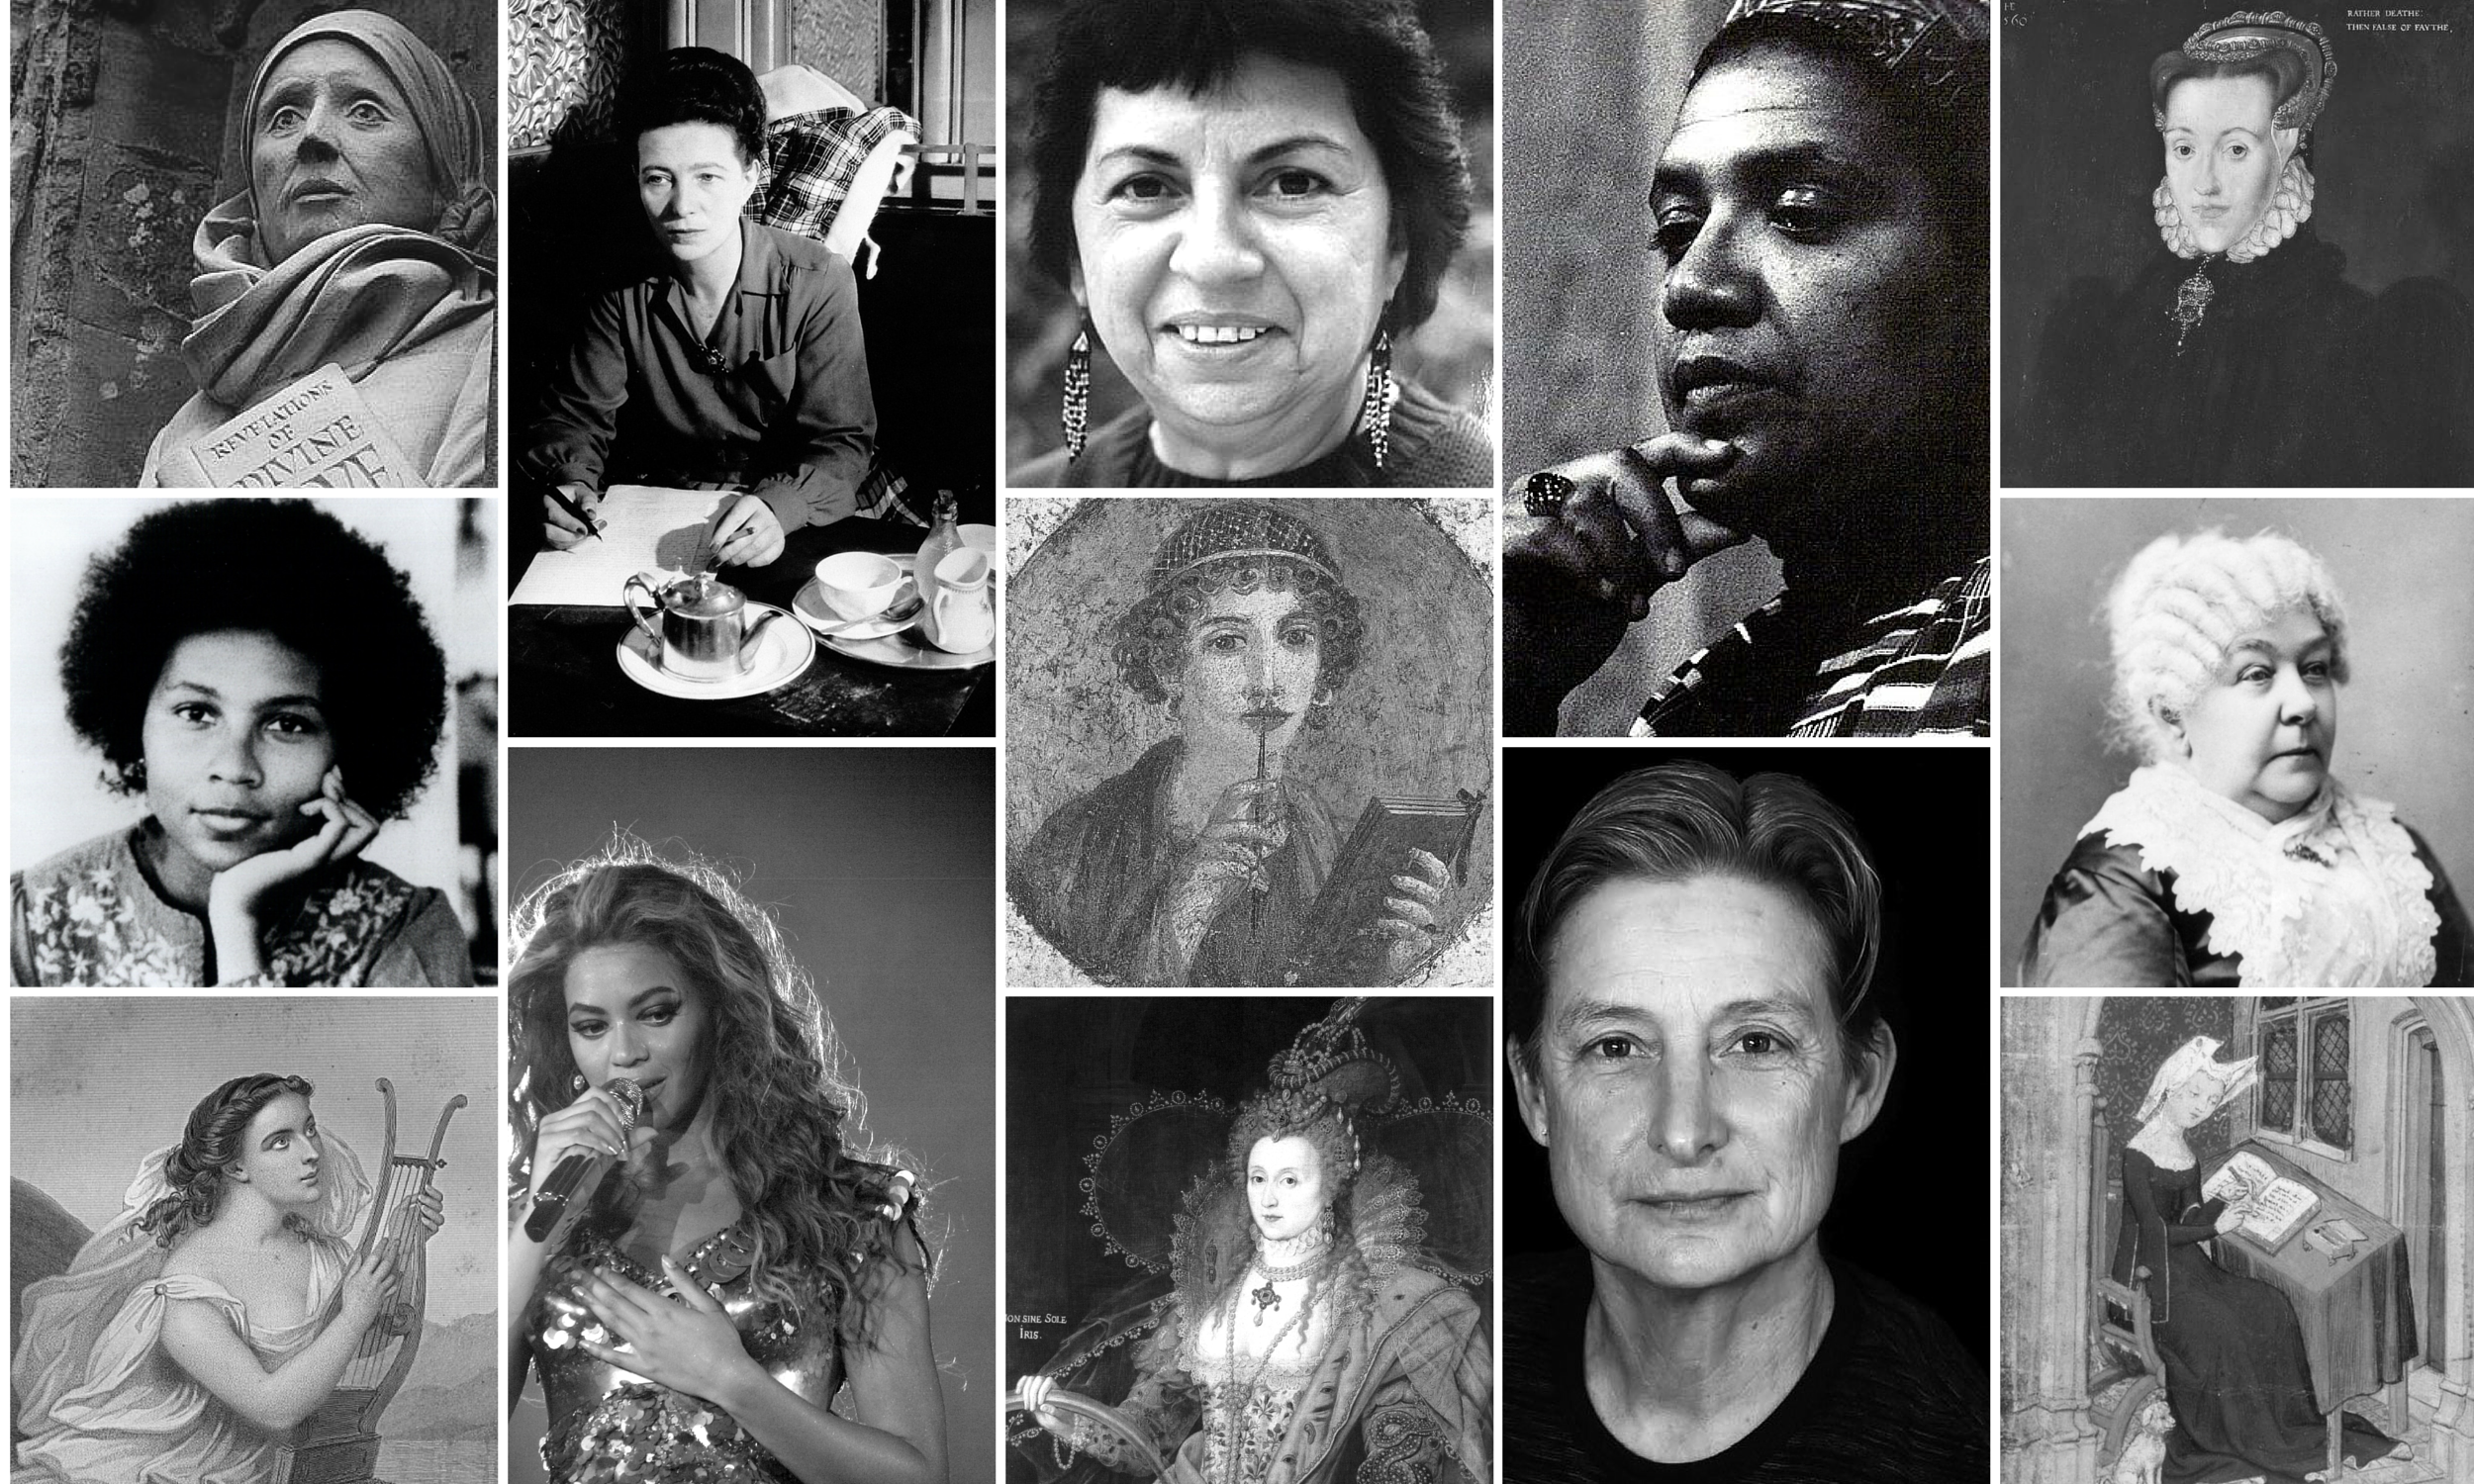 Black and white grid compilation of feminist rhetors reviewed. Top row from left: Julian of Norwich, Simone De Beauvoir, Gloria Anzaldua, Audre Lorde, Anne Askew. Second row from left: Bell Hooks, Sappho, Elizabeth Cady Stanton. Bottom row from left: Hortensia, Beyoncé, Queen Elizabeth I, Judith Butler, Christine de Pisan.  All images courtesy of Wikipedia/Wikimedia Commons.